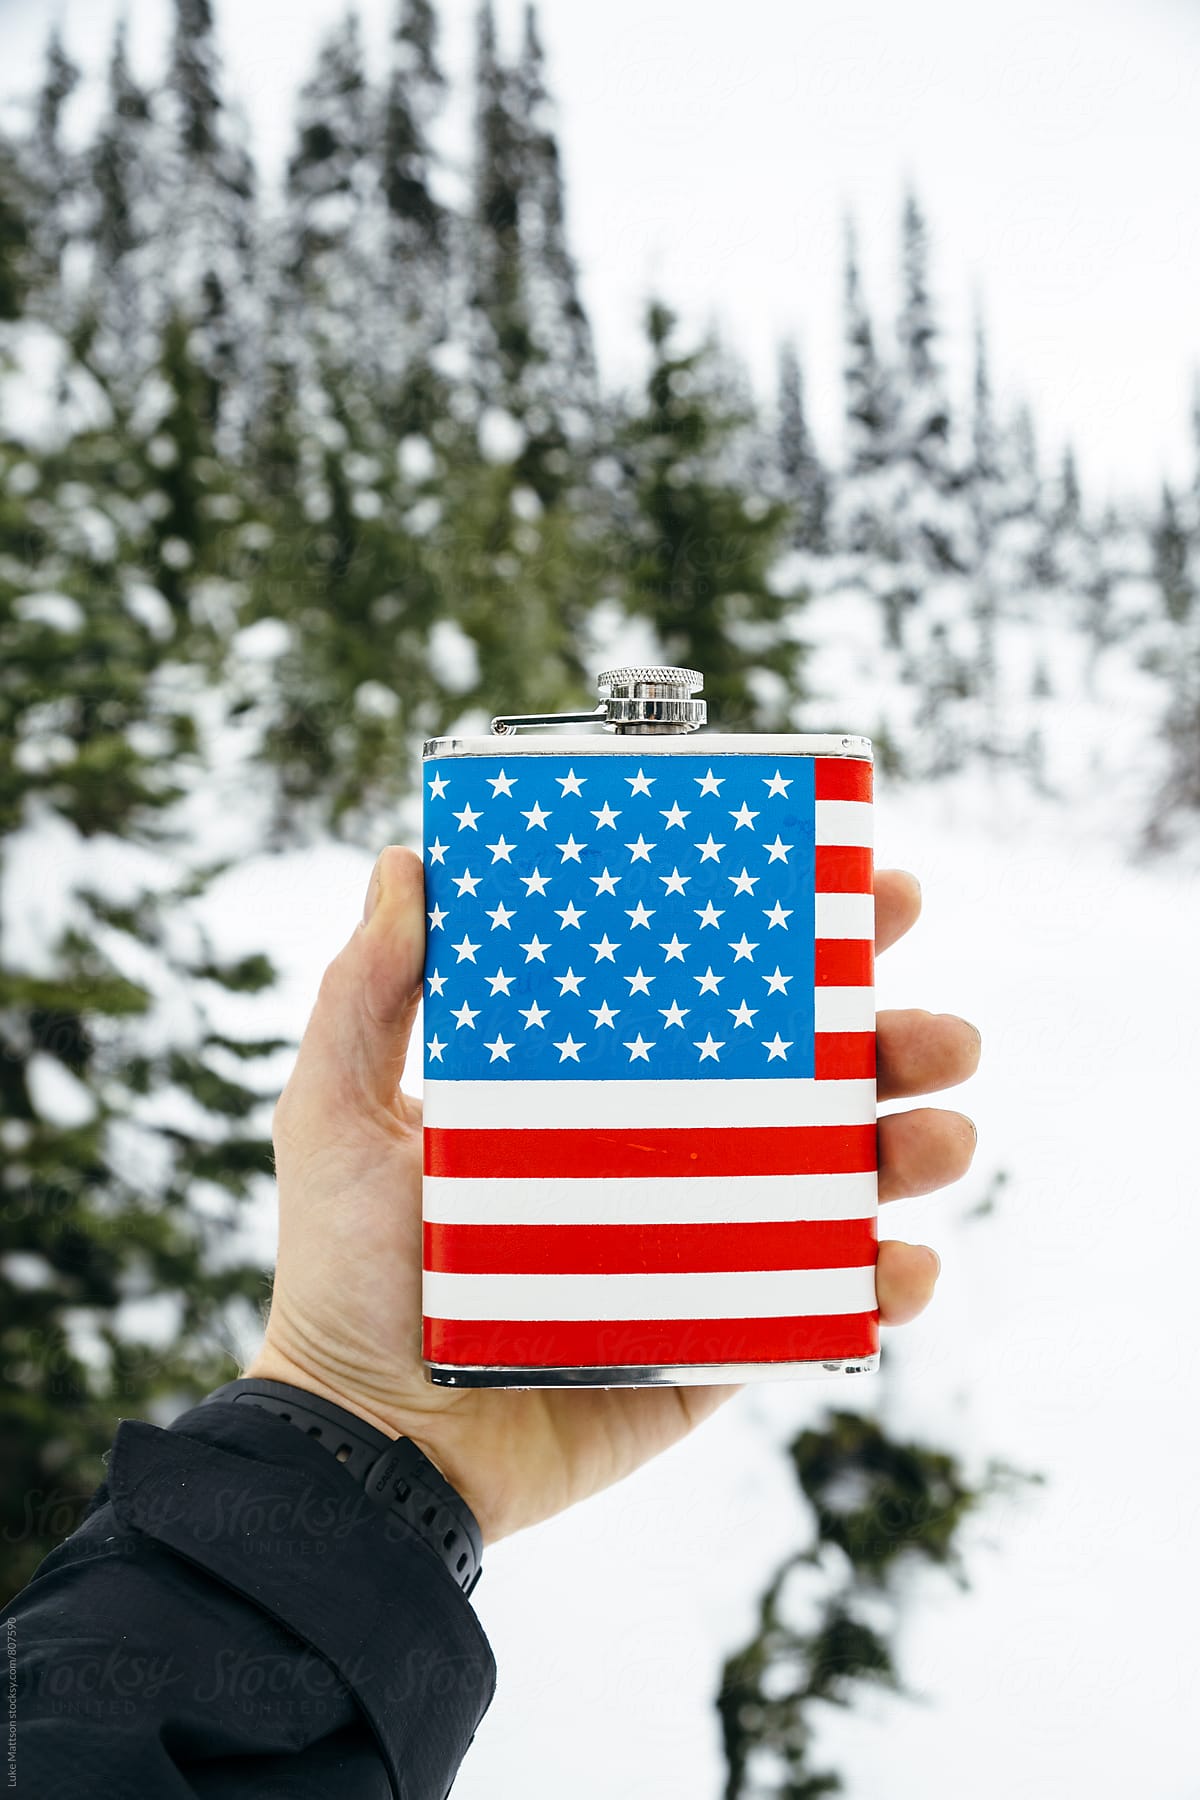 Man Holding Out American Flag Flask In Hand In Snowy Forest